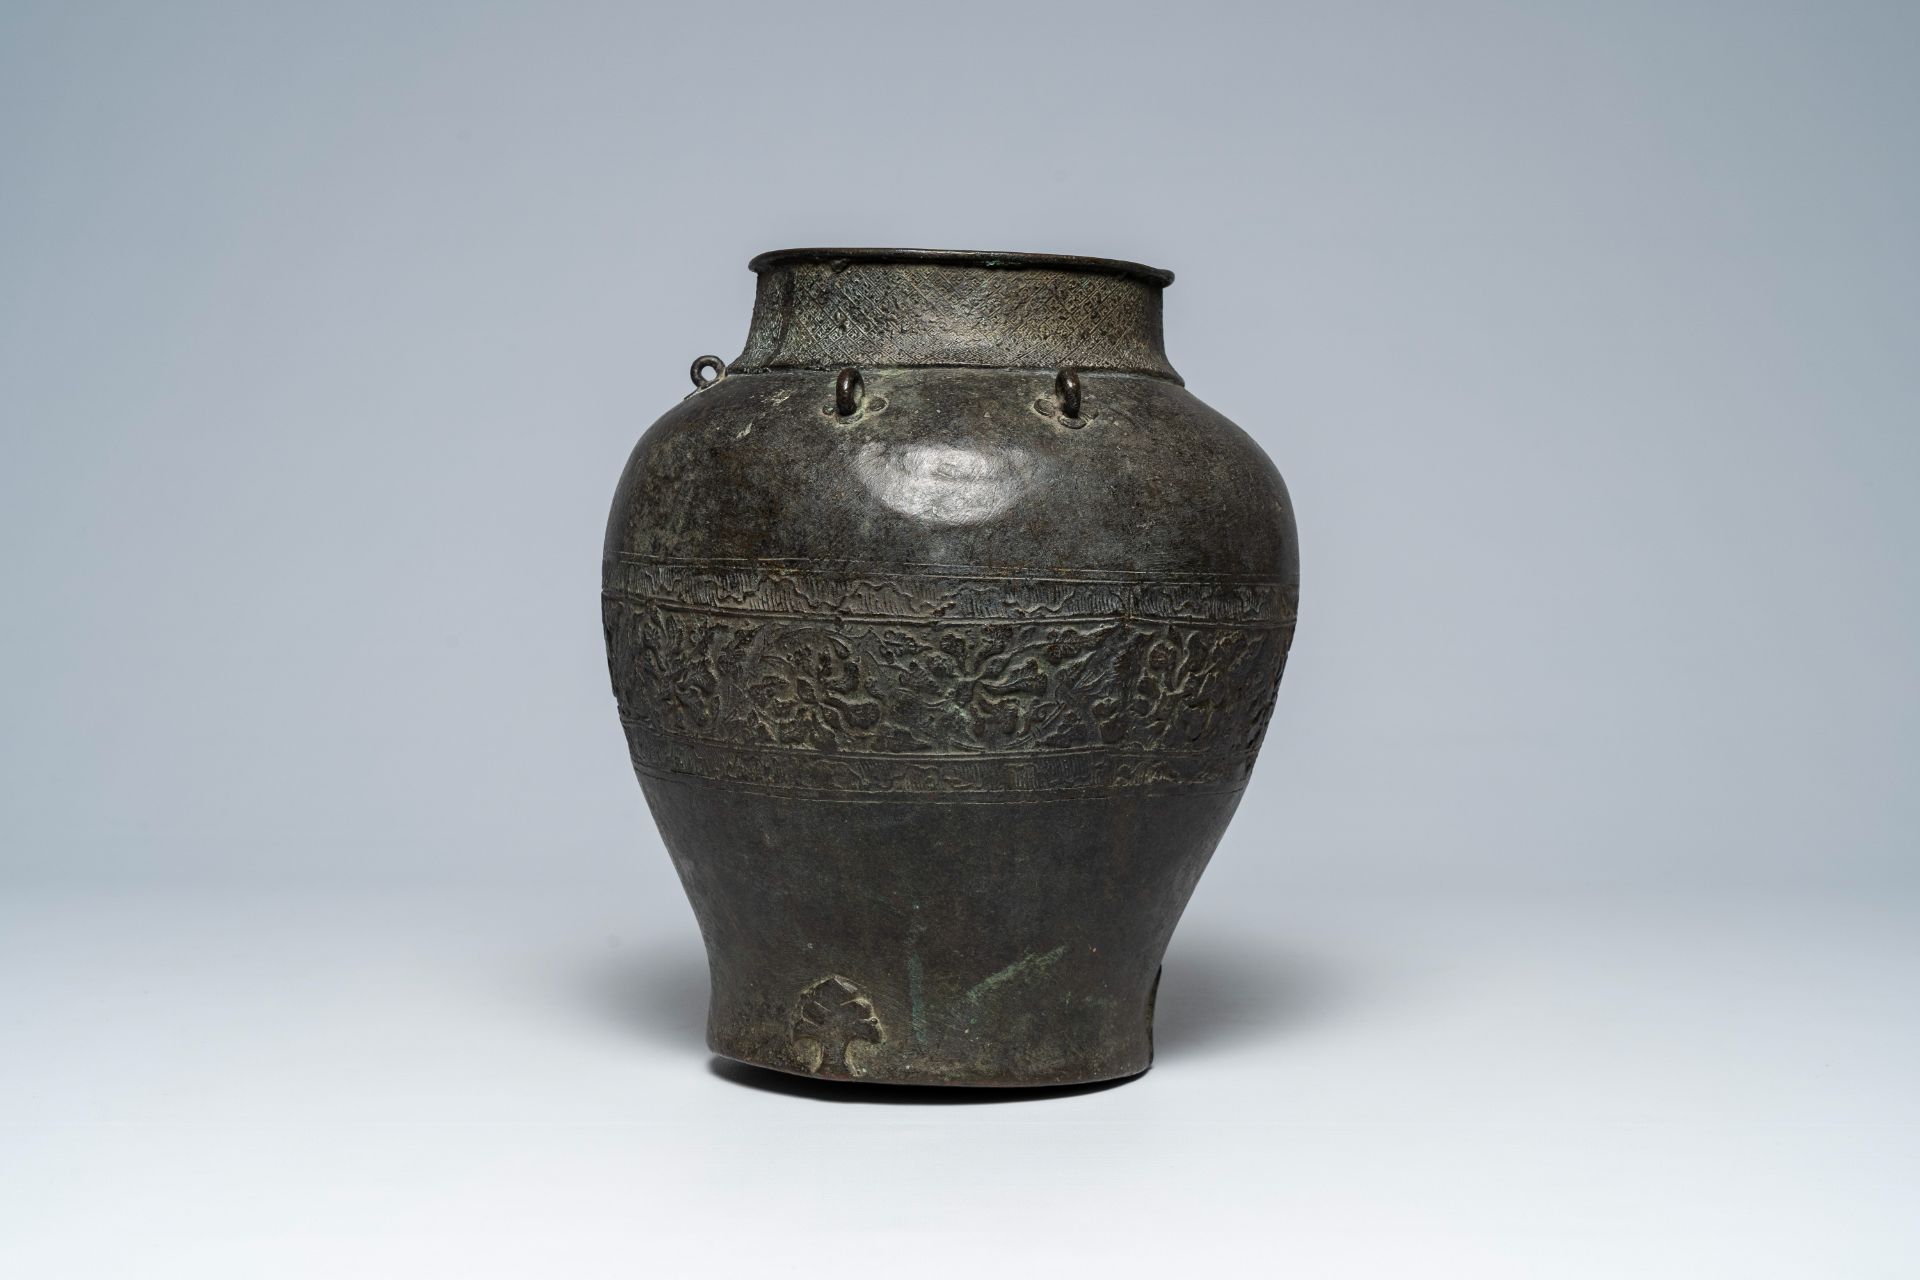 A Japanese or Korean bronze vase with floral relief frieze, probably 17th/18th C. - Image 2 of 6